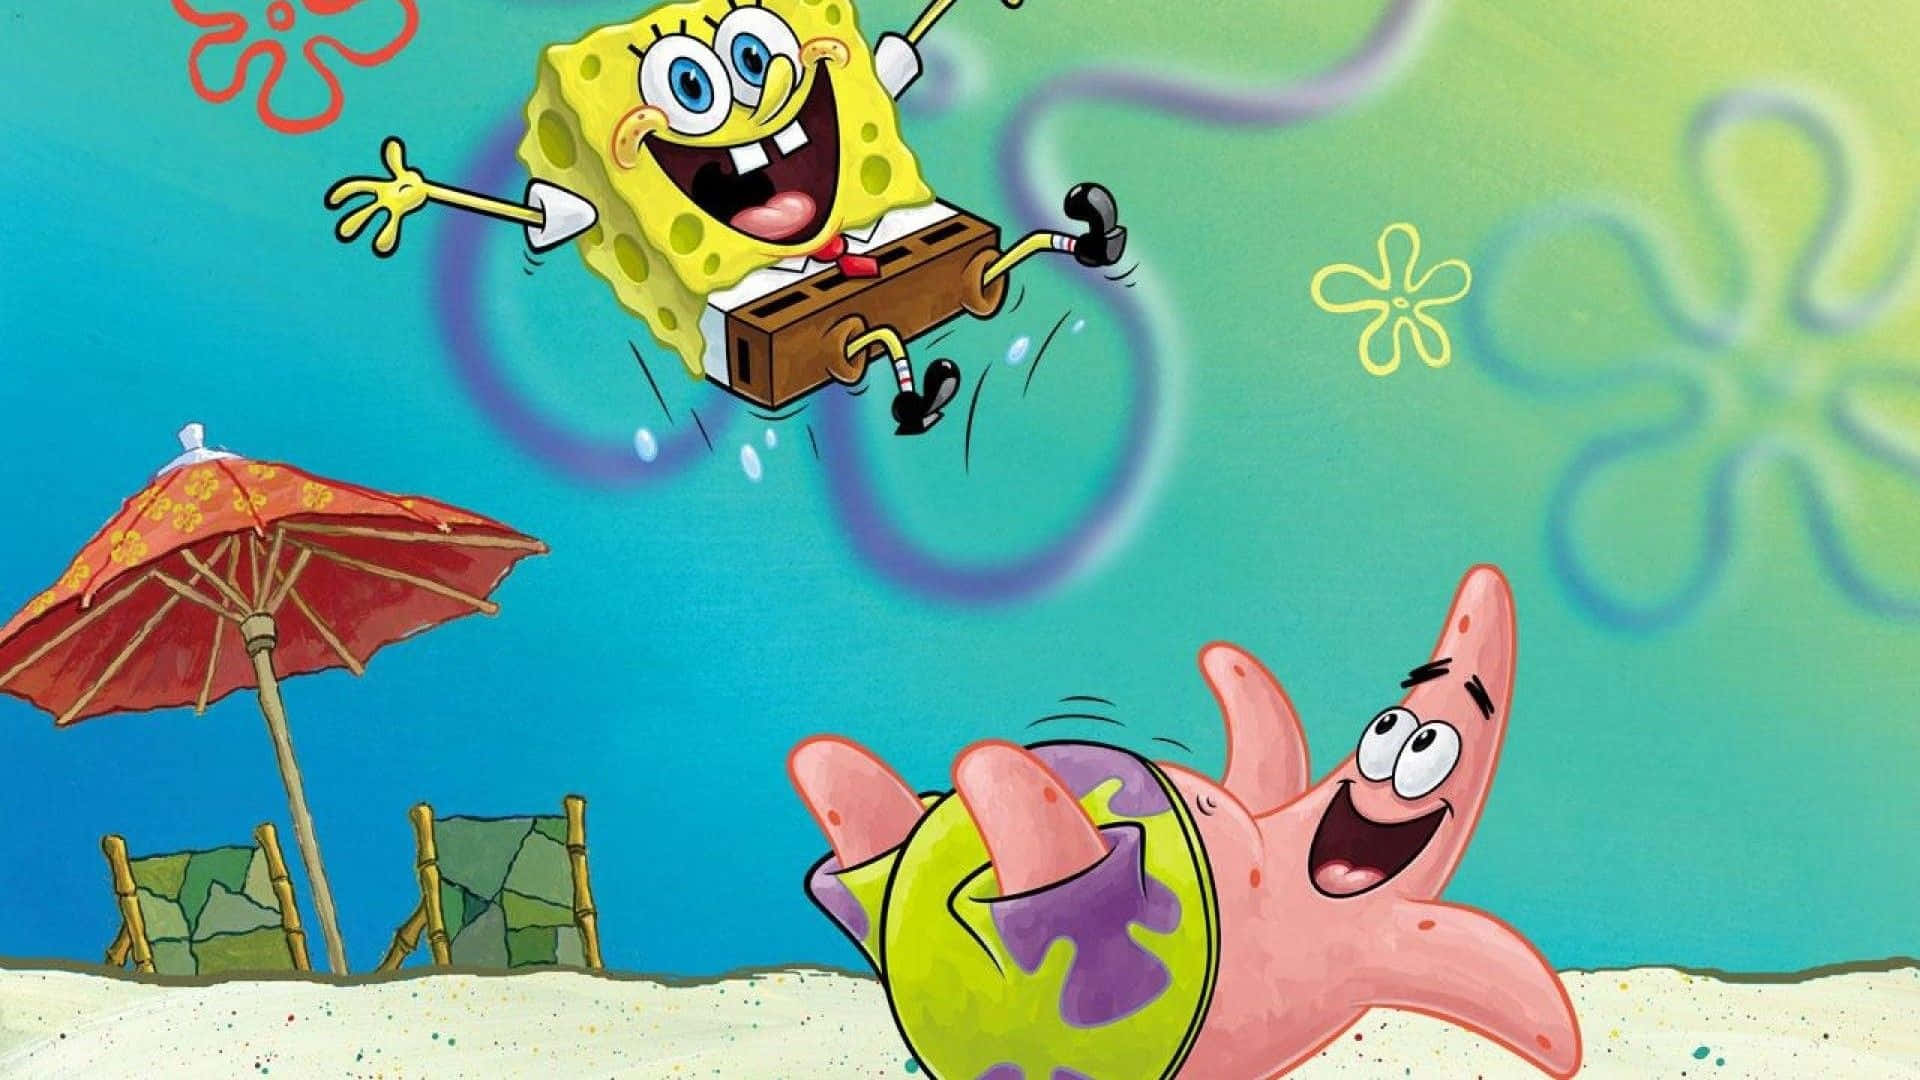 Enjoy your device’s look with this Spongebob aesthetic-themed wallpaper. Wallpaper